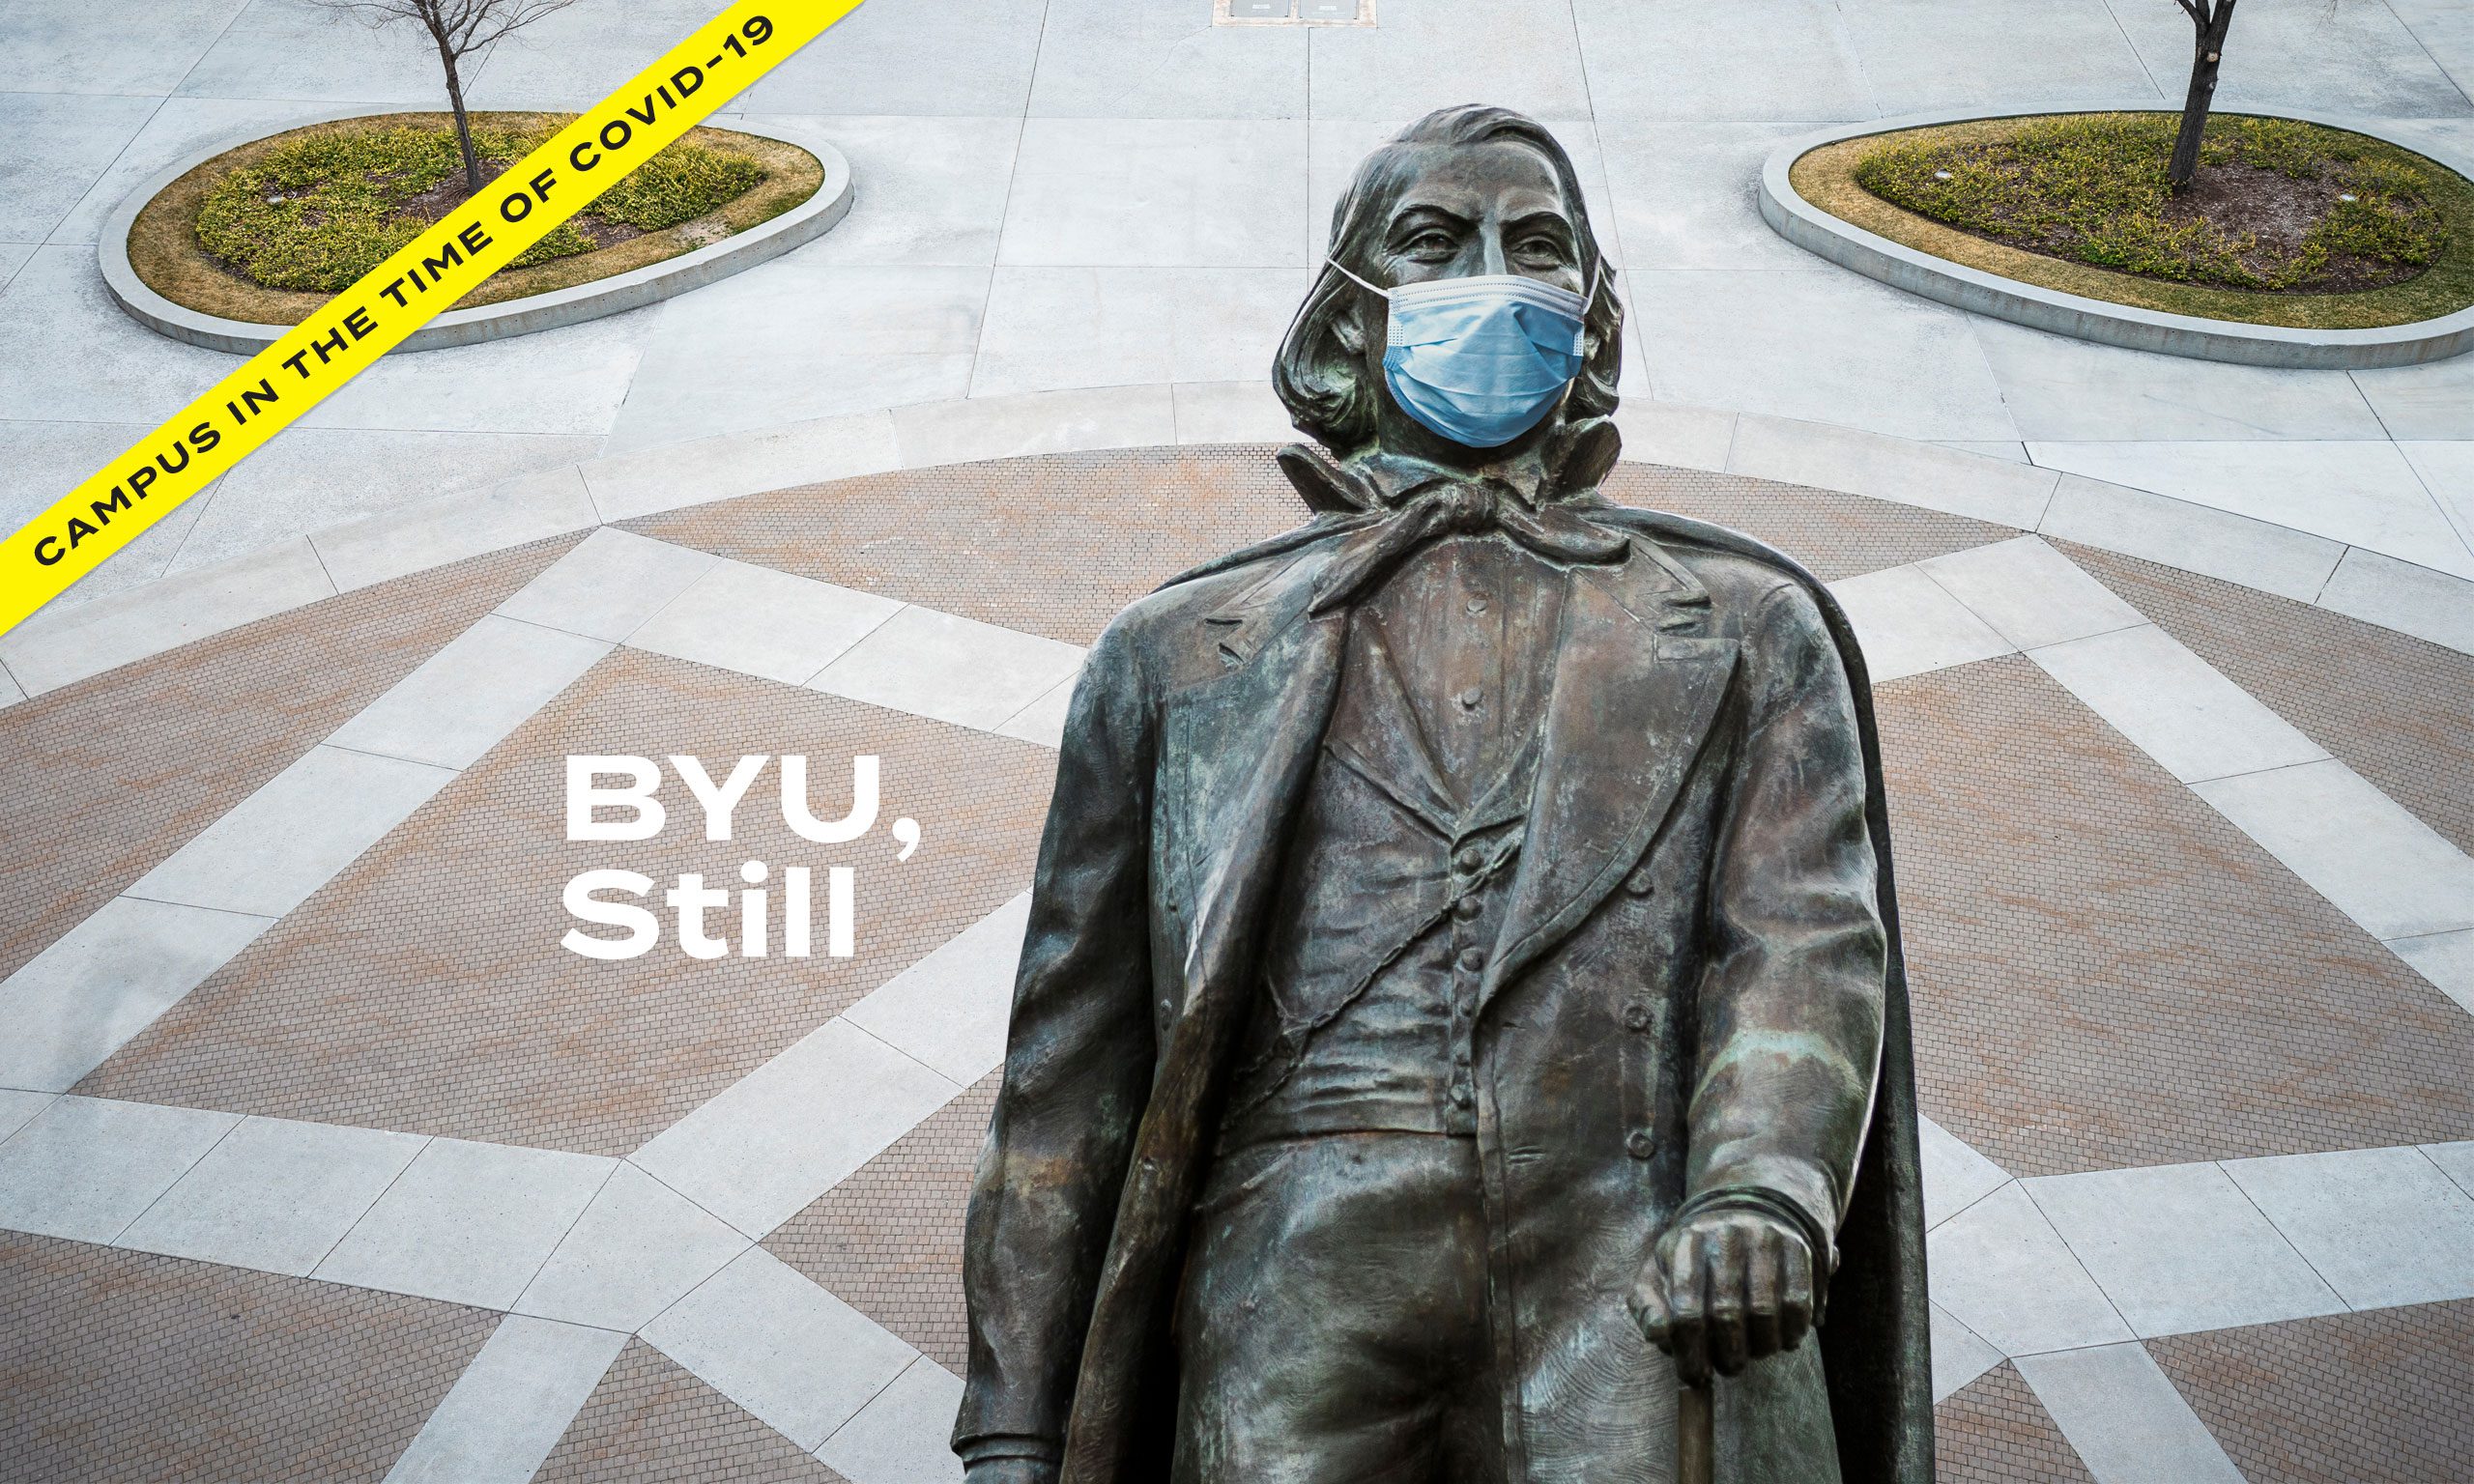 An opening image for a magazine article titled, "BYU, Still" shows an empty statue with the Brigham Young statue wearing a medical mask and yellow police tape that reads "Campus in the time of COVID-19"